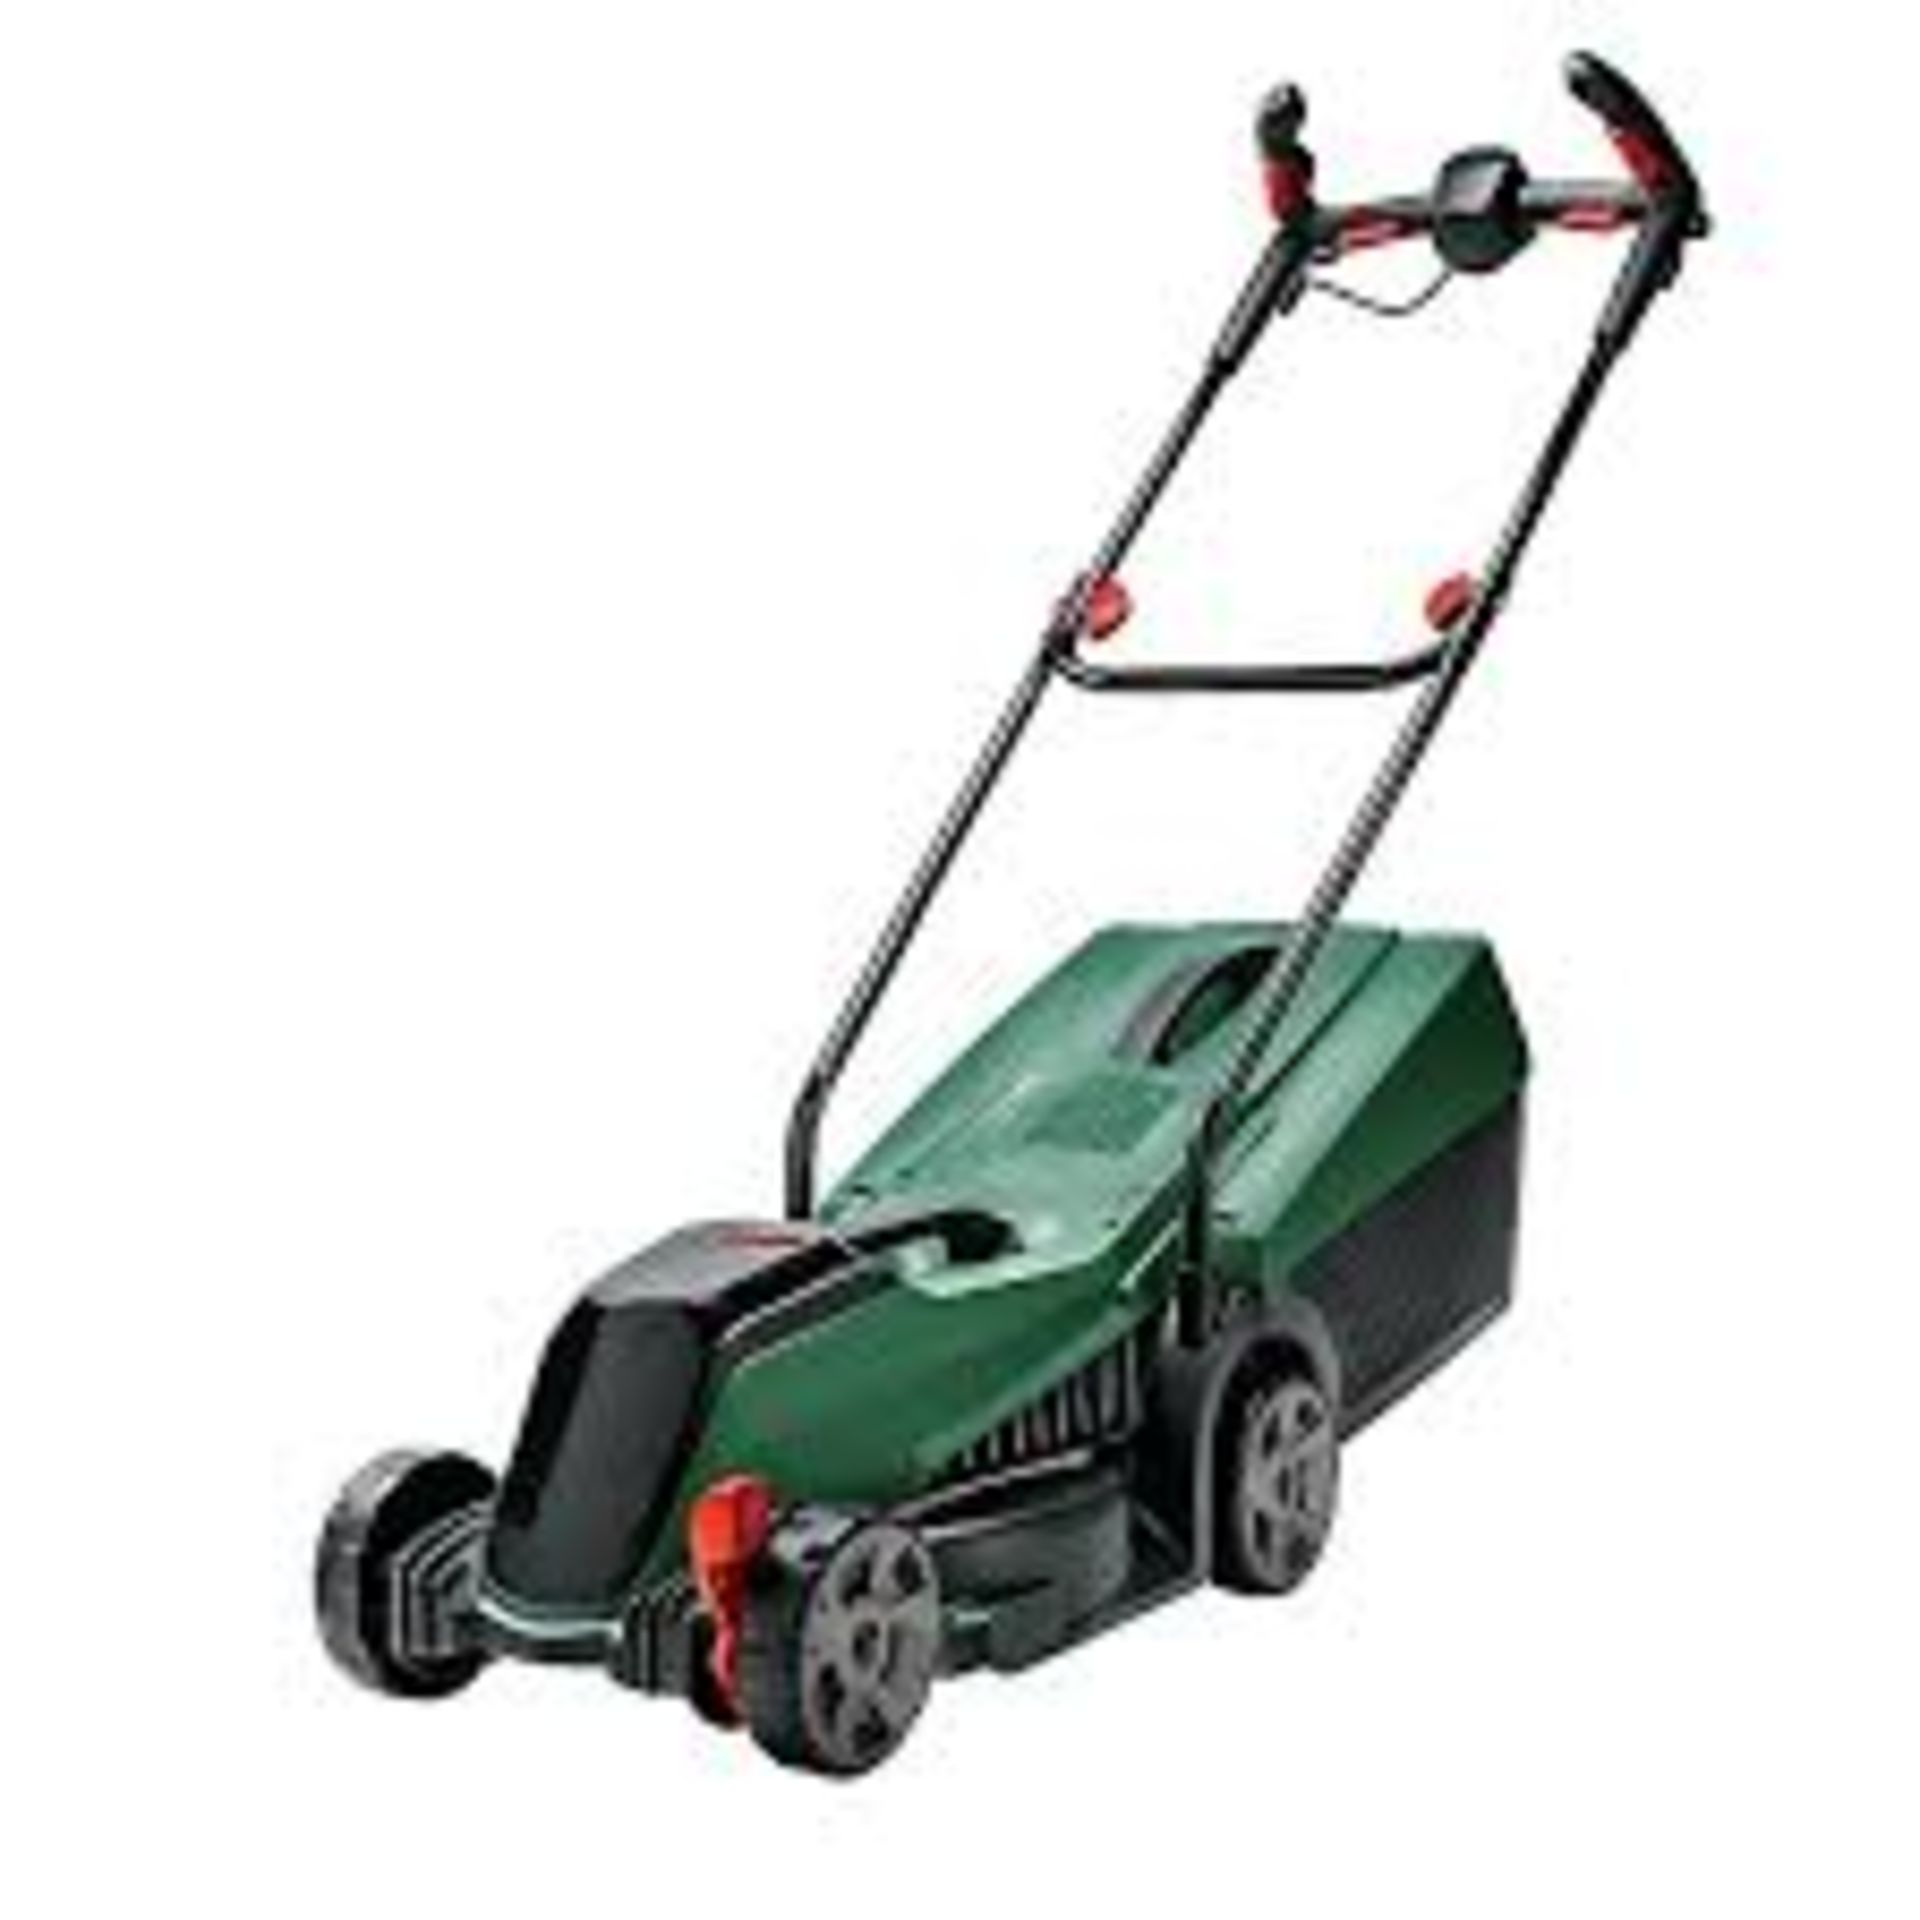 Bosch Power for all CityMower 18-32 Cordless 18V Rotary Lawnmower. - S2.11. The CityMower18 is a